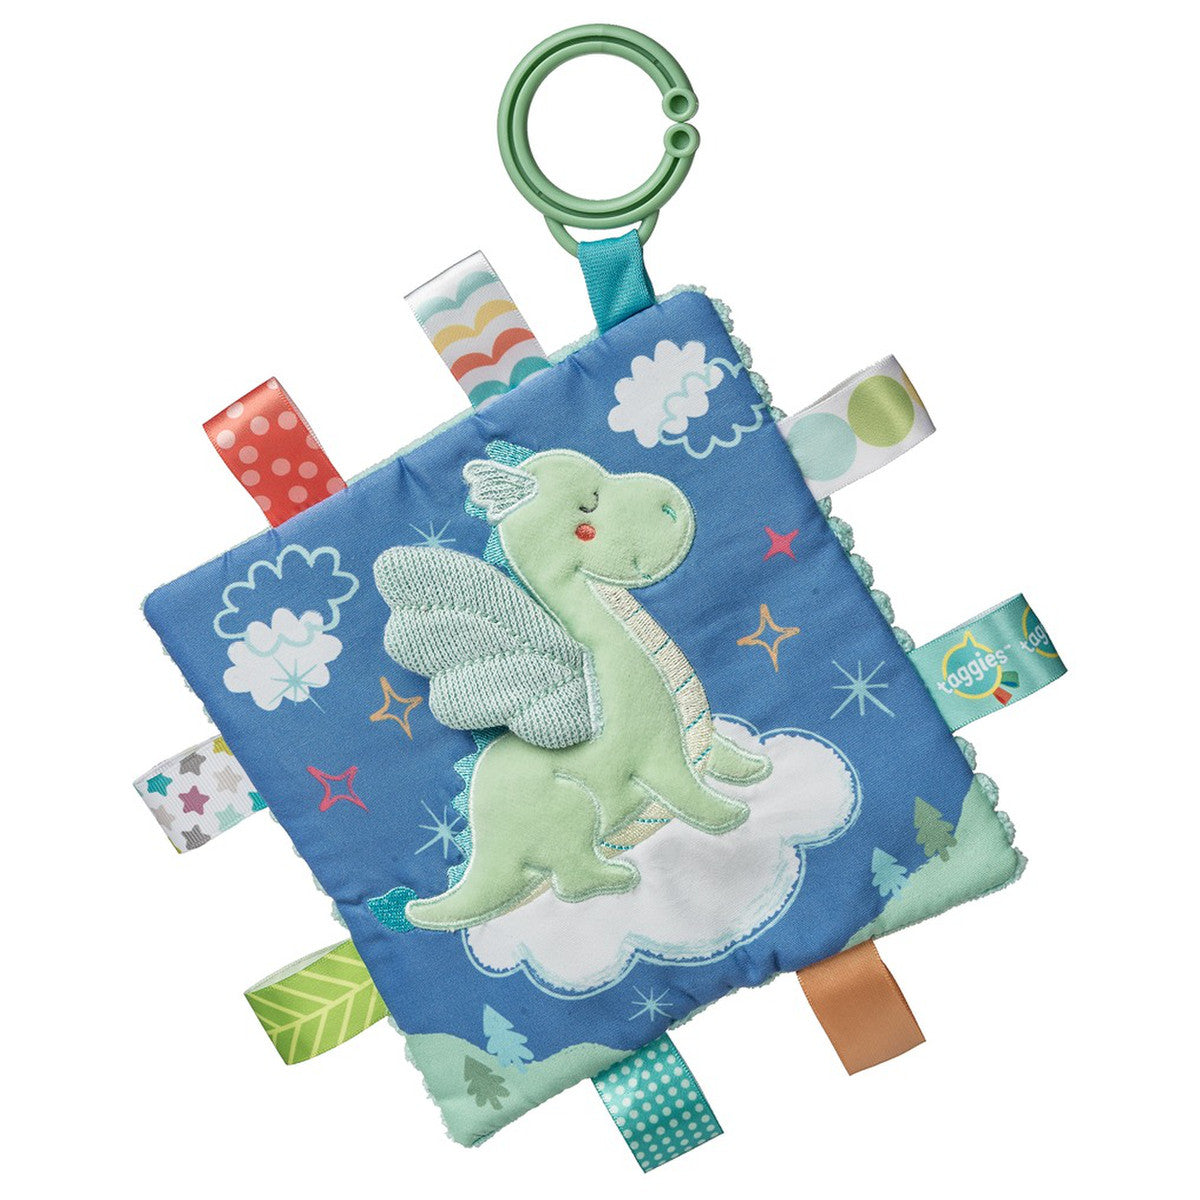 Mary Meyer Taggies Crinkle Me Drax Dragon Activity Toy